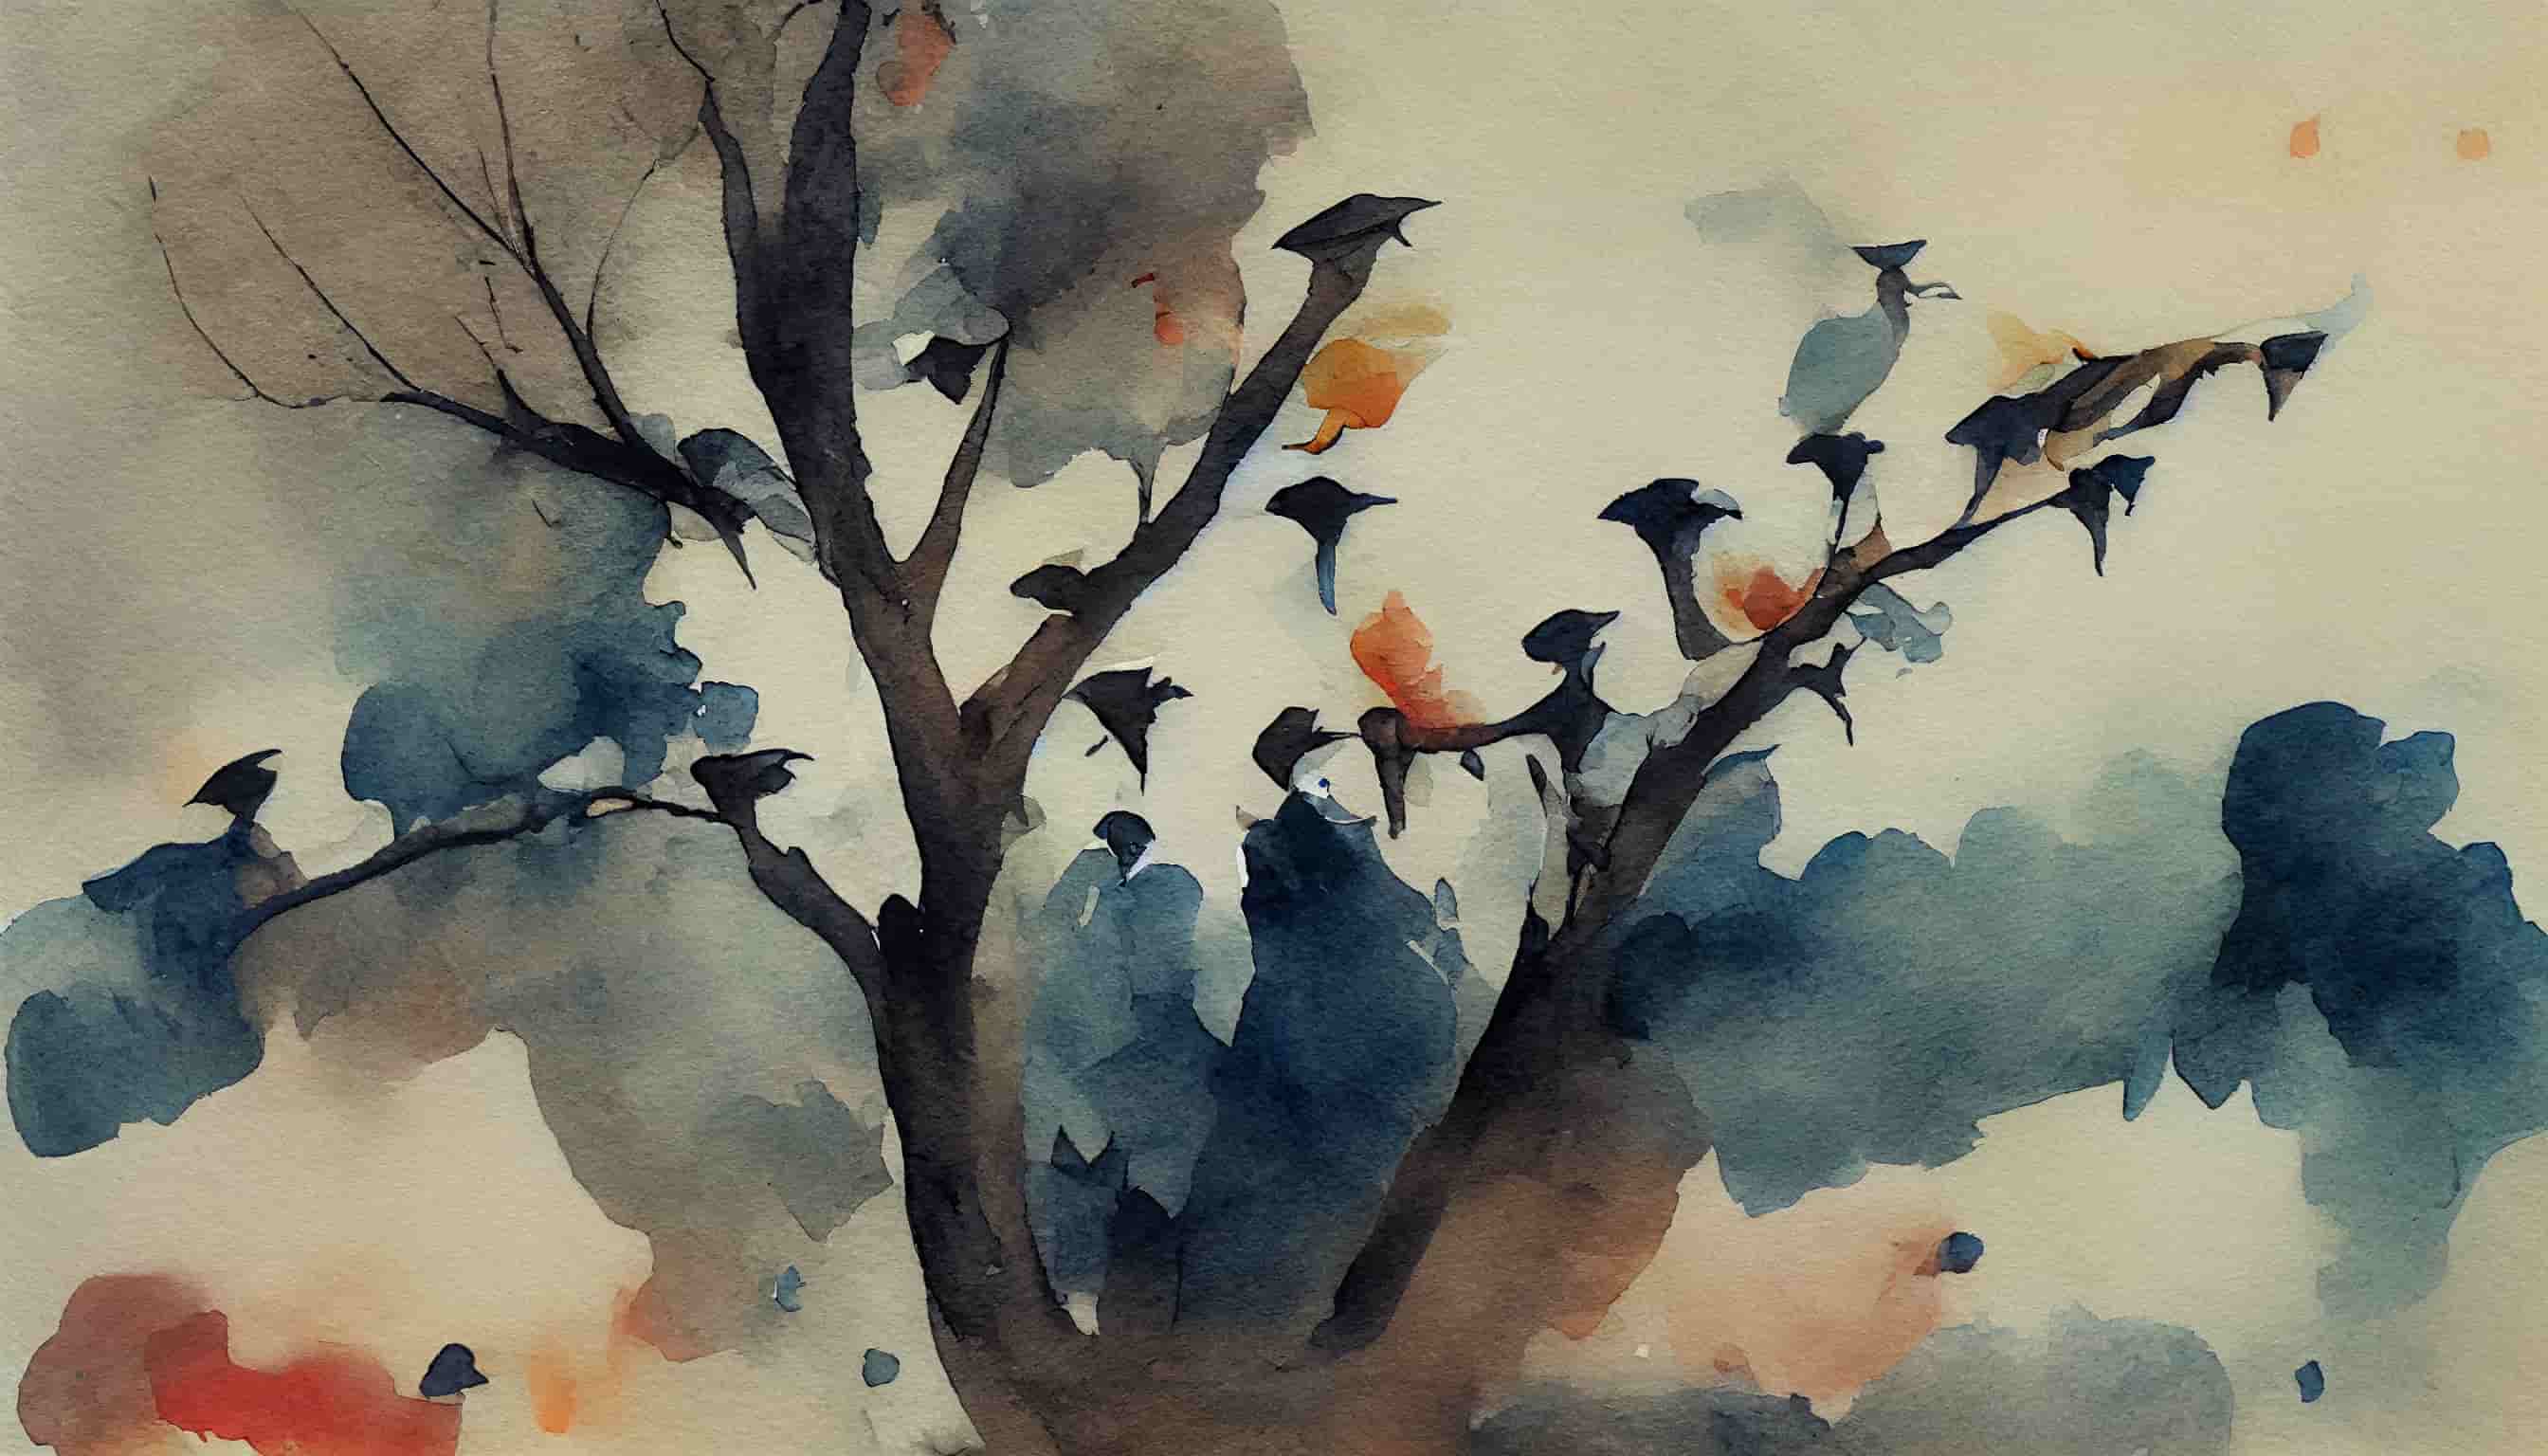 watercolor of a sad community of birds sitting on a tree with some flying away